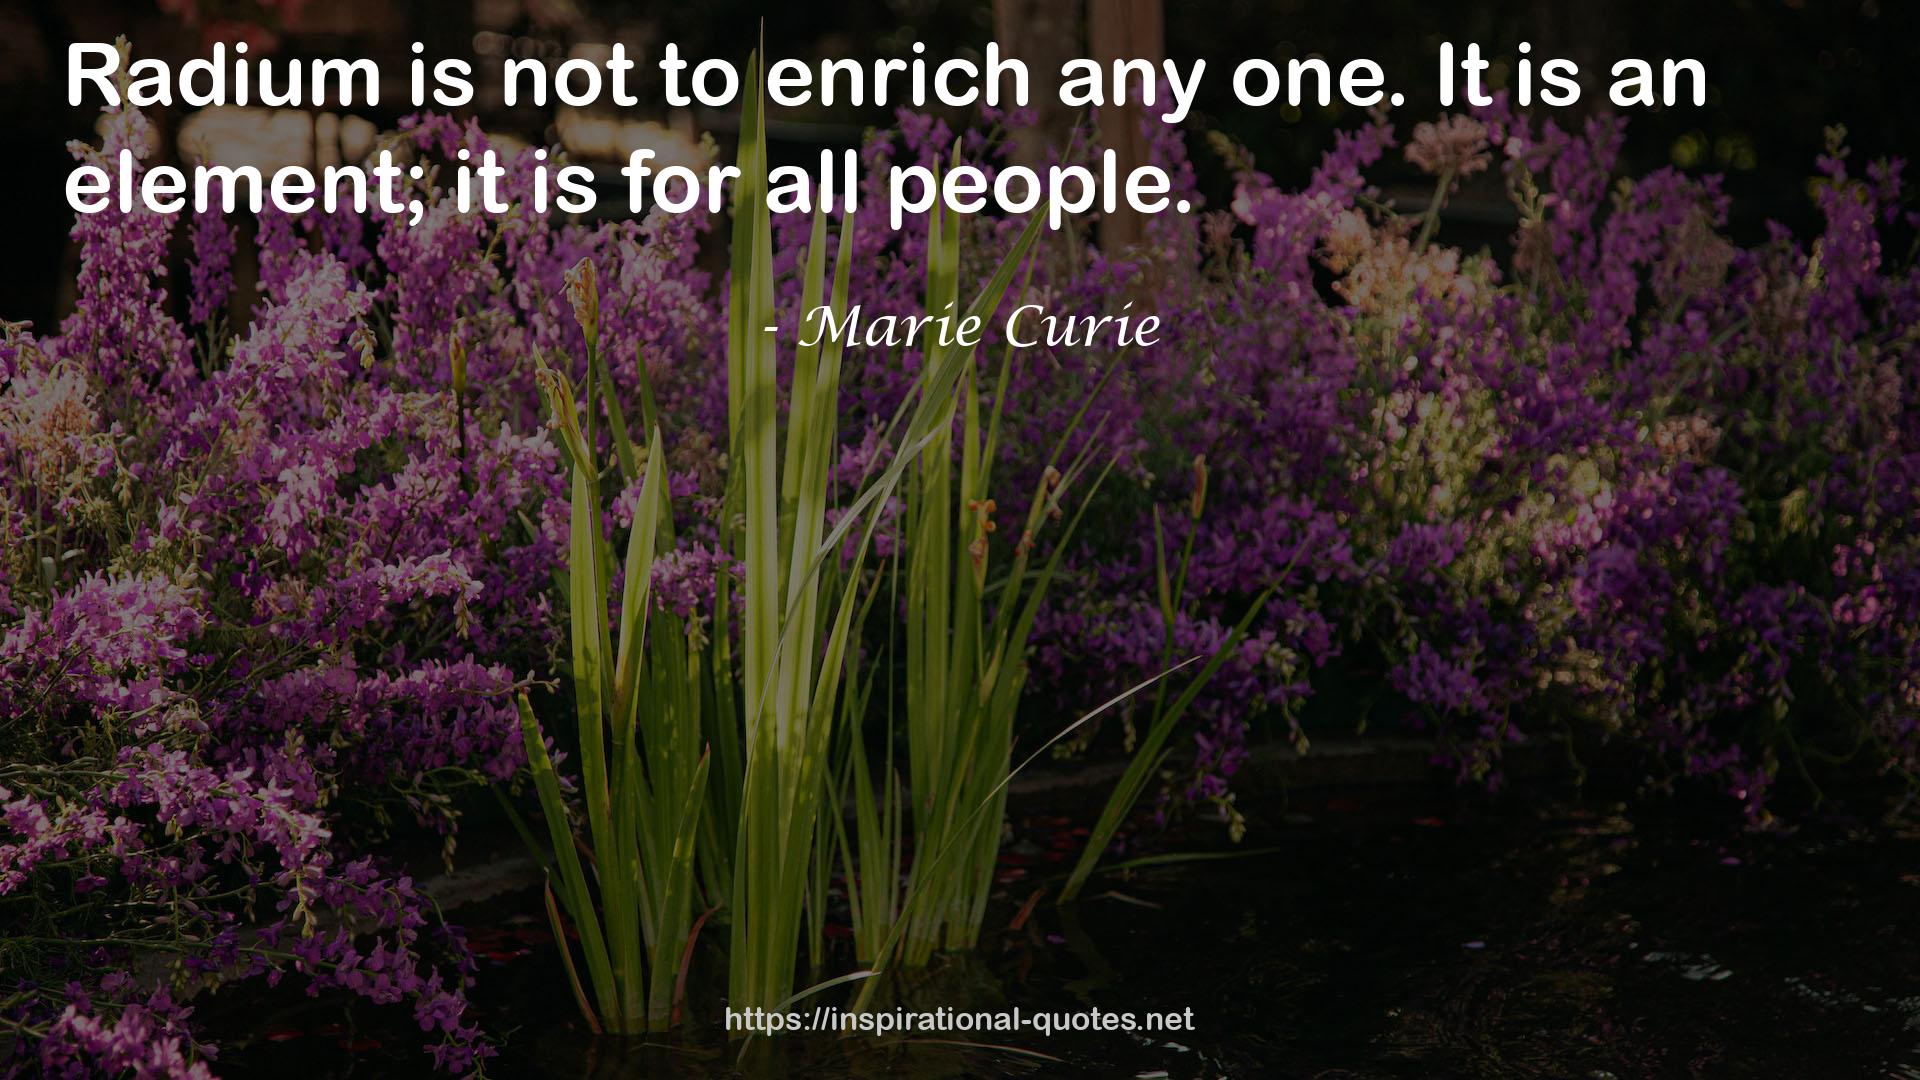 Marie Curie QUOTES